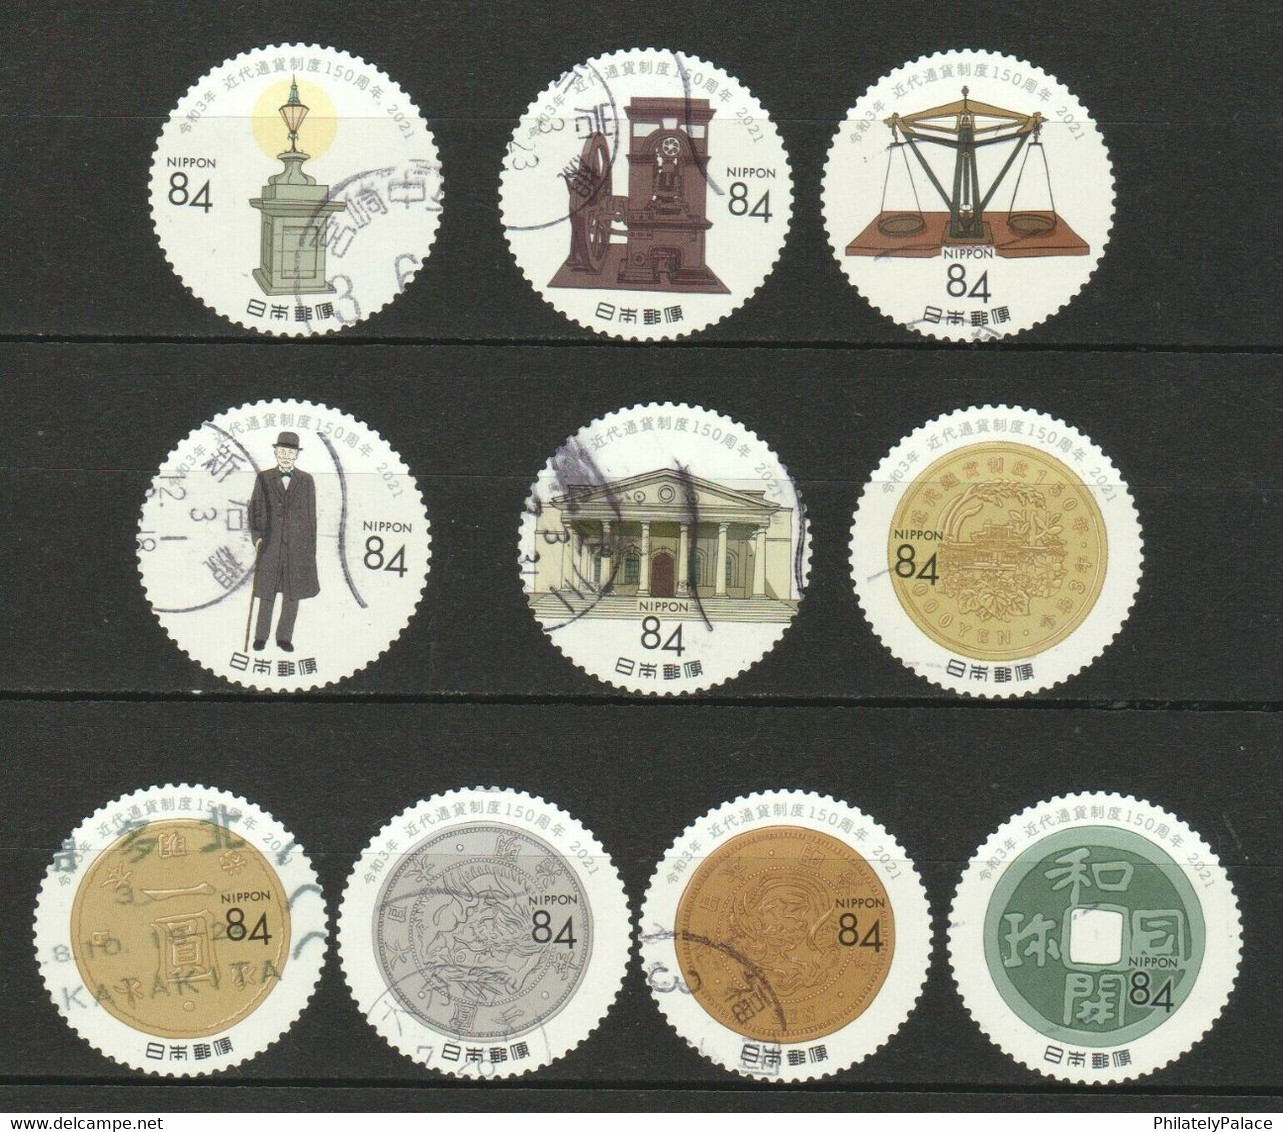 JAPAN 2021 150TH ANNIV. OF MODERN CURRENCY MONETARY SYSTEM COMP. SET OF 10 STAMP  (**) - Gebruikt